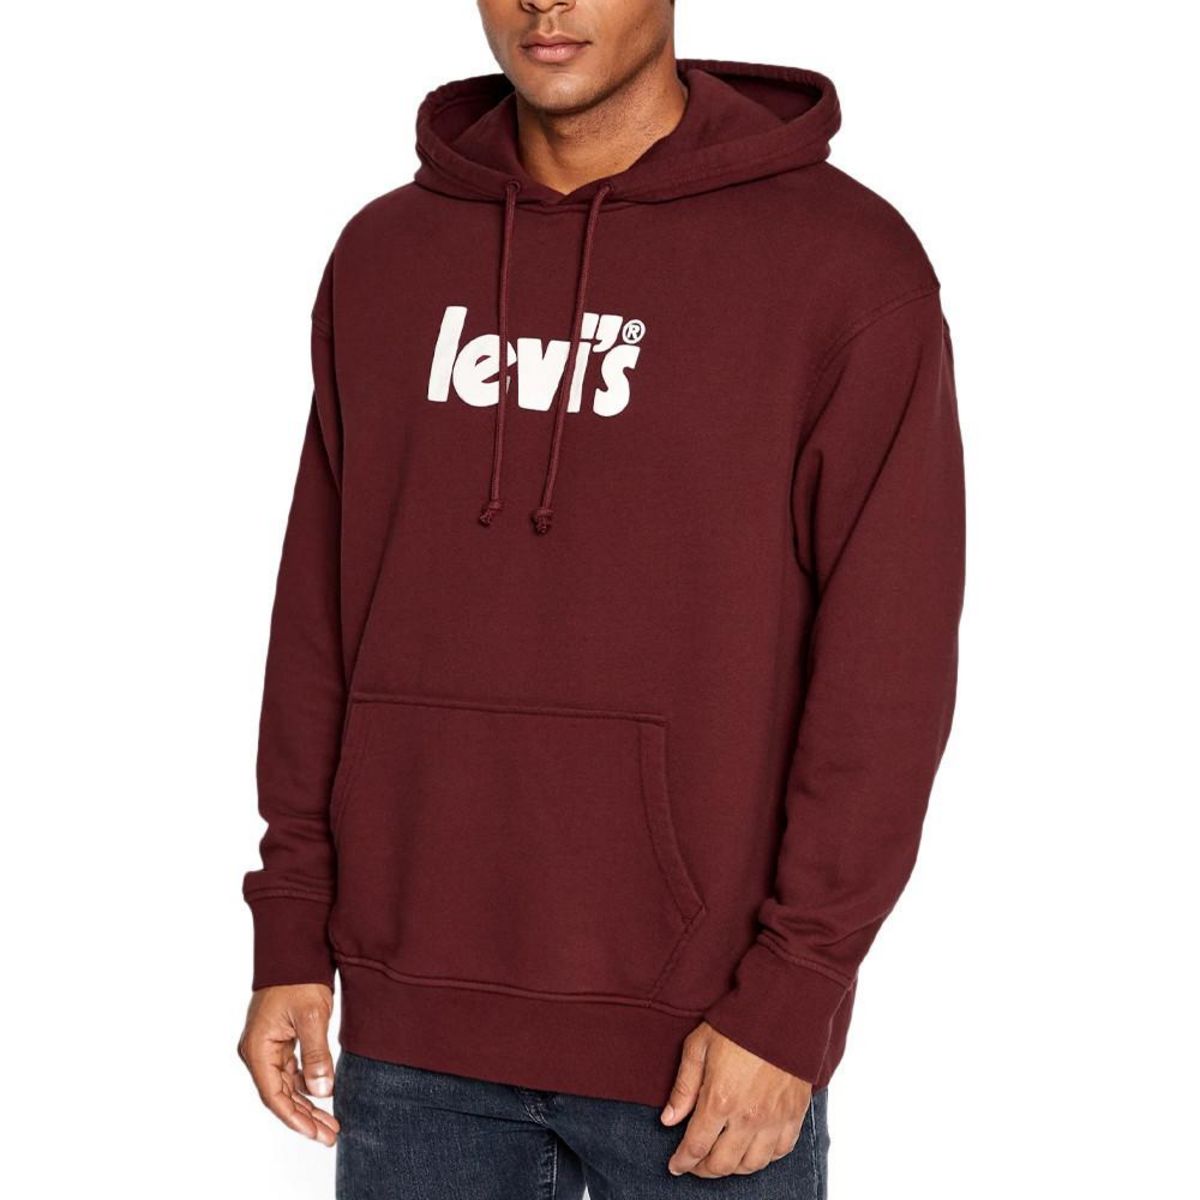 pull levis homme